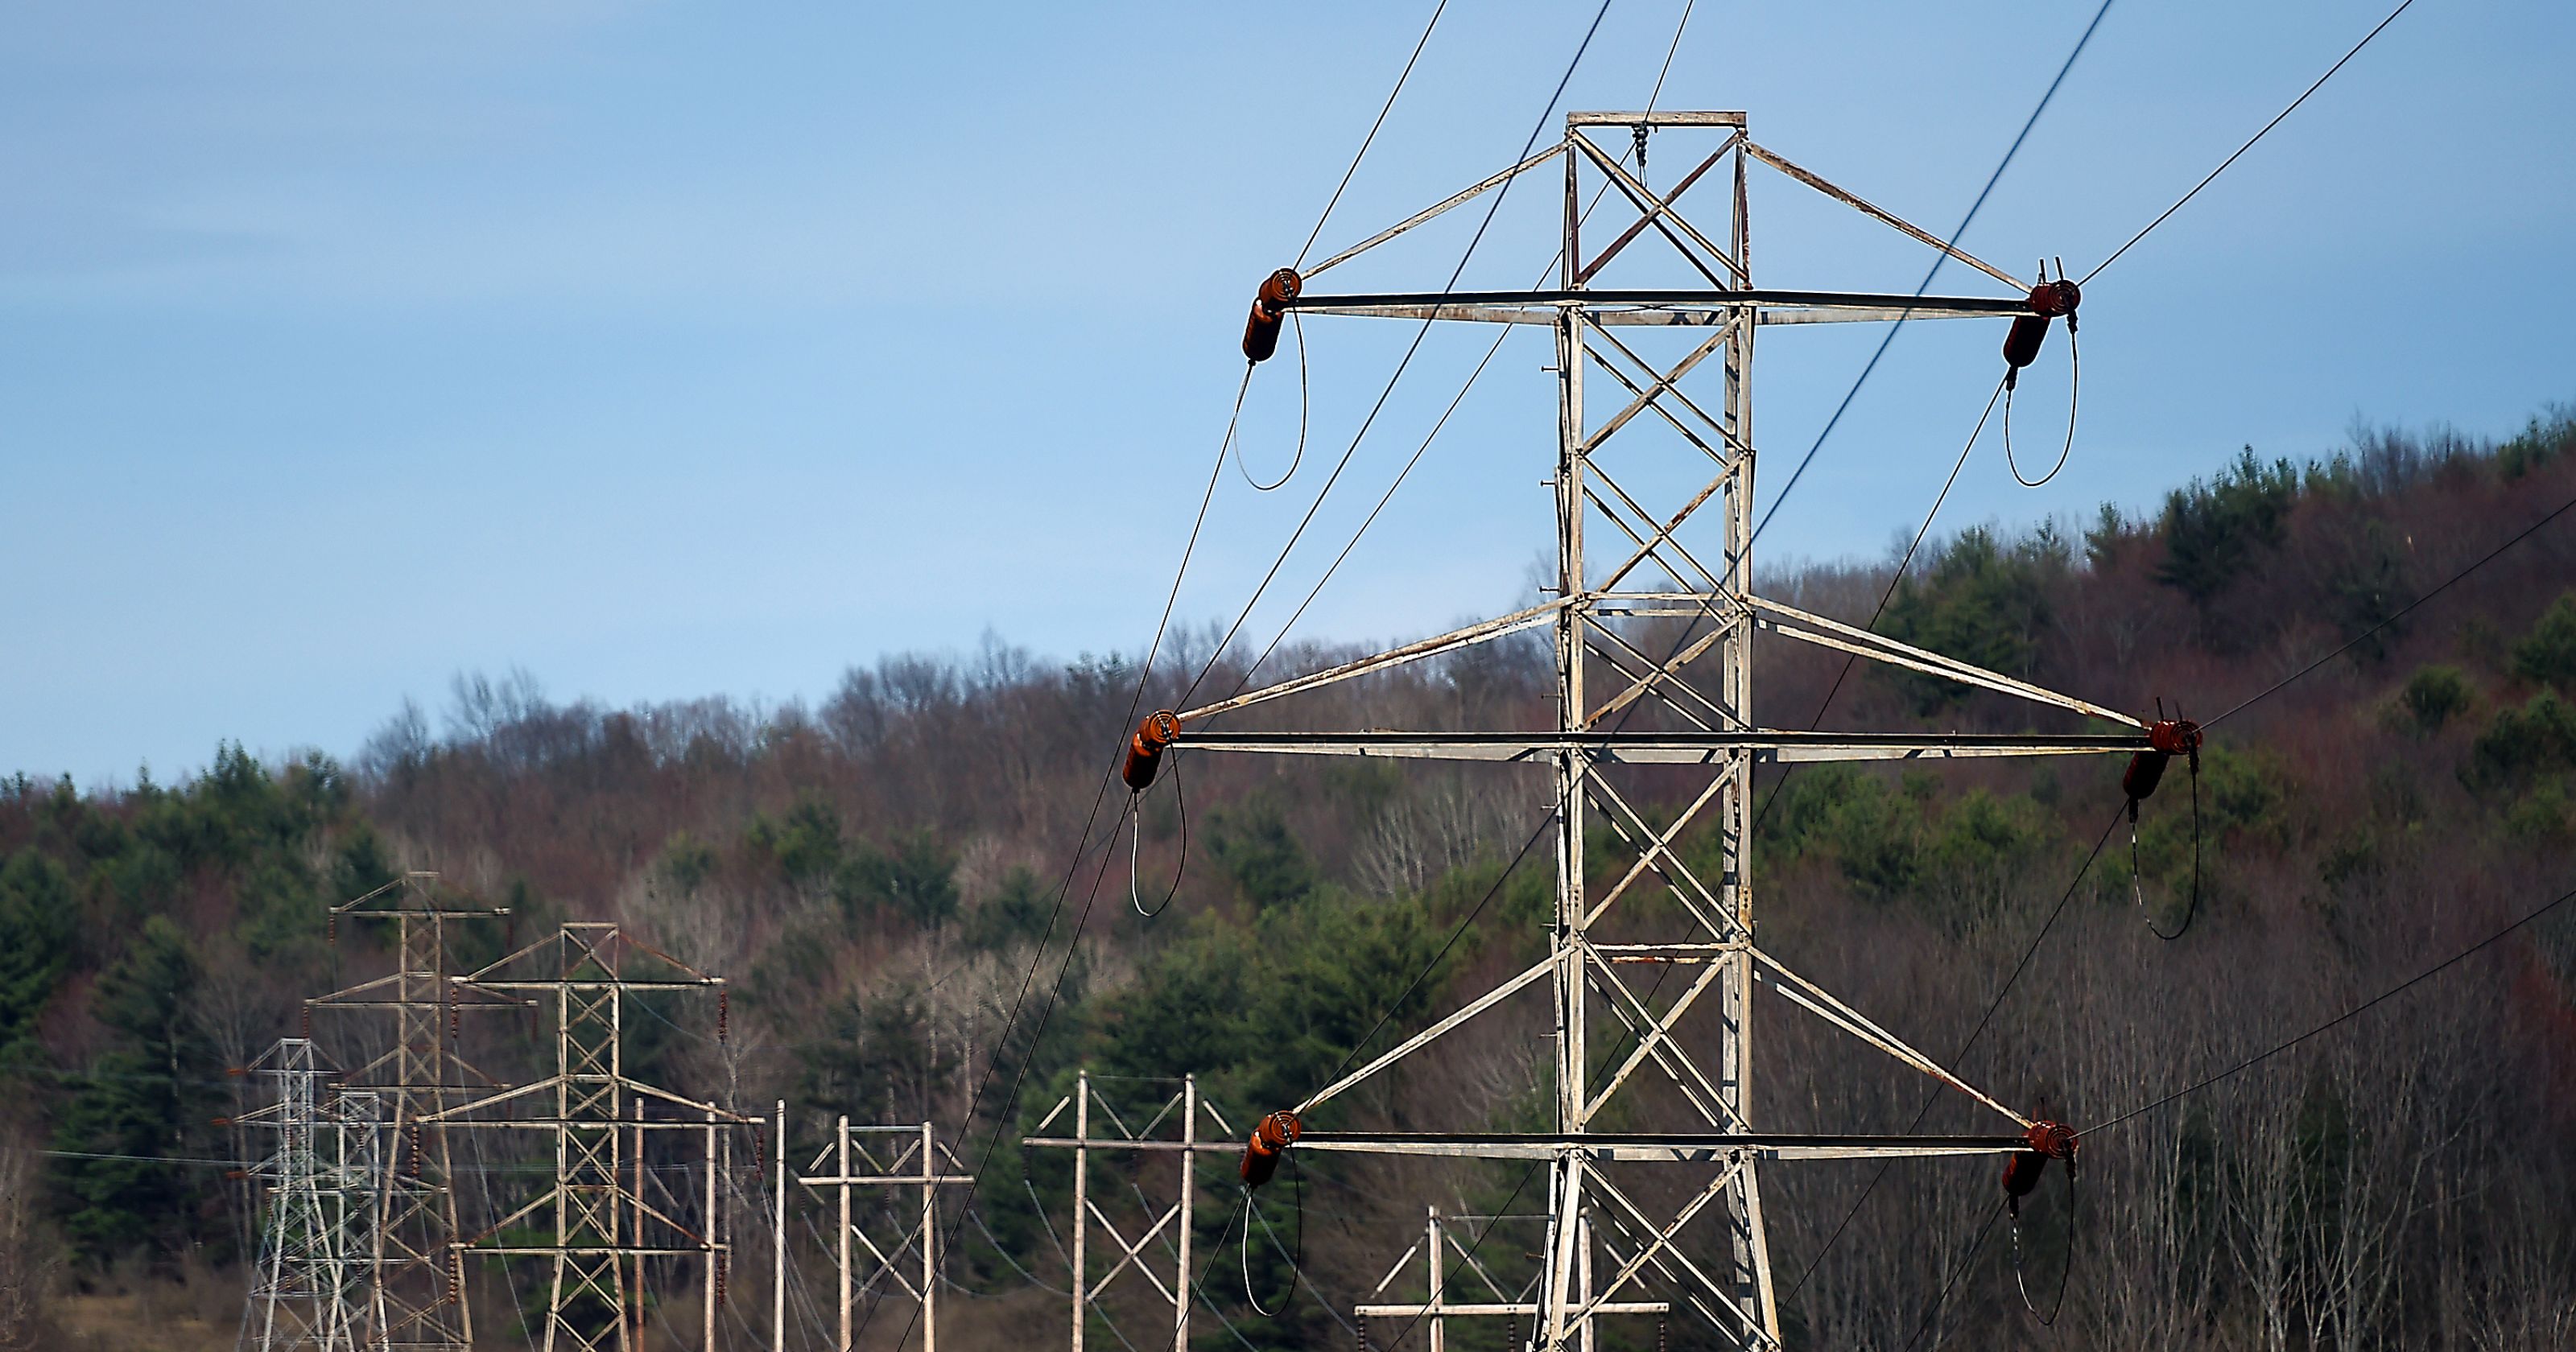 Electric providers face concerned landowners in rehab of power lines